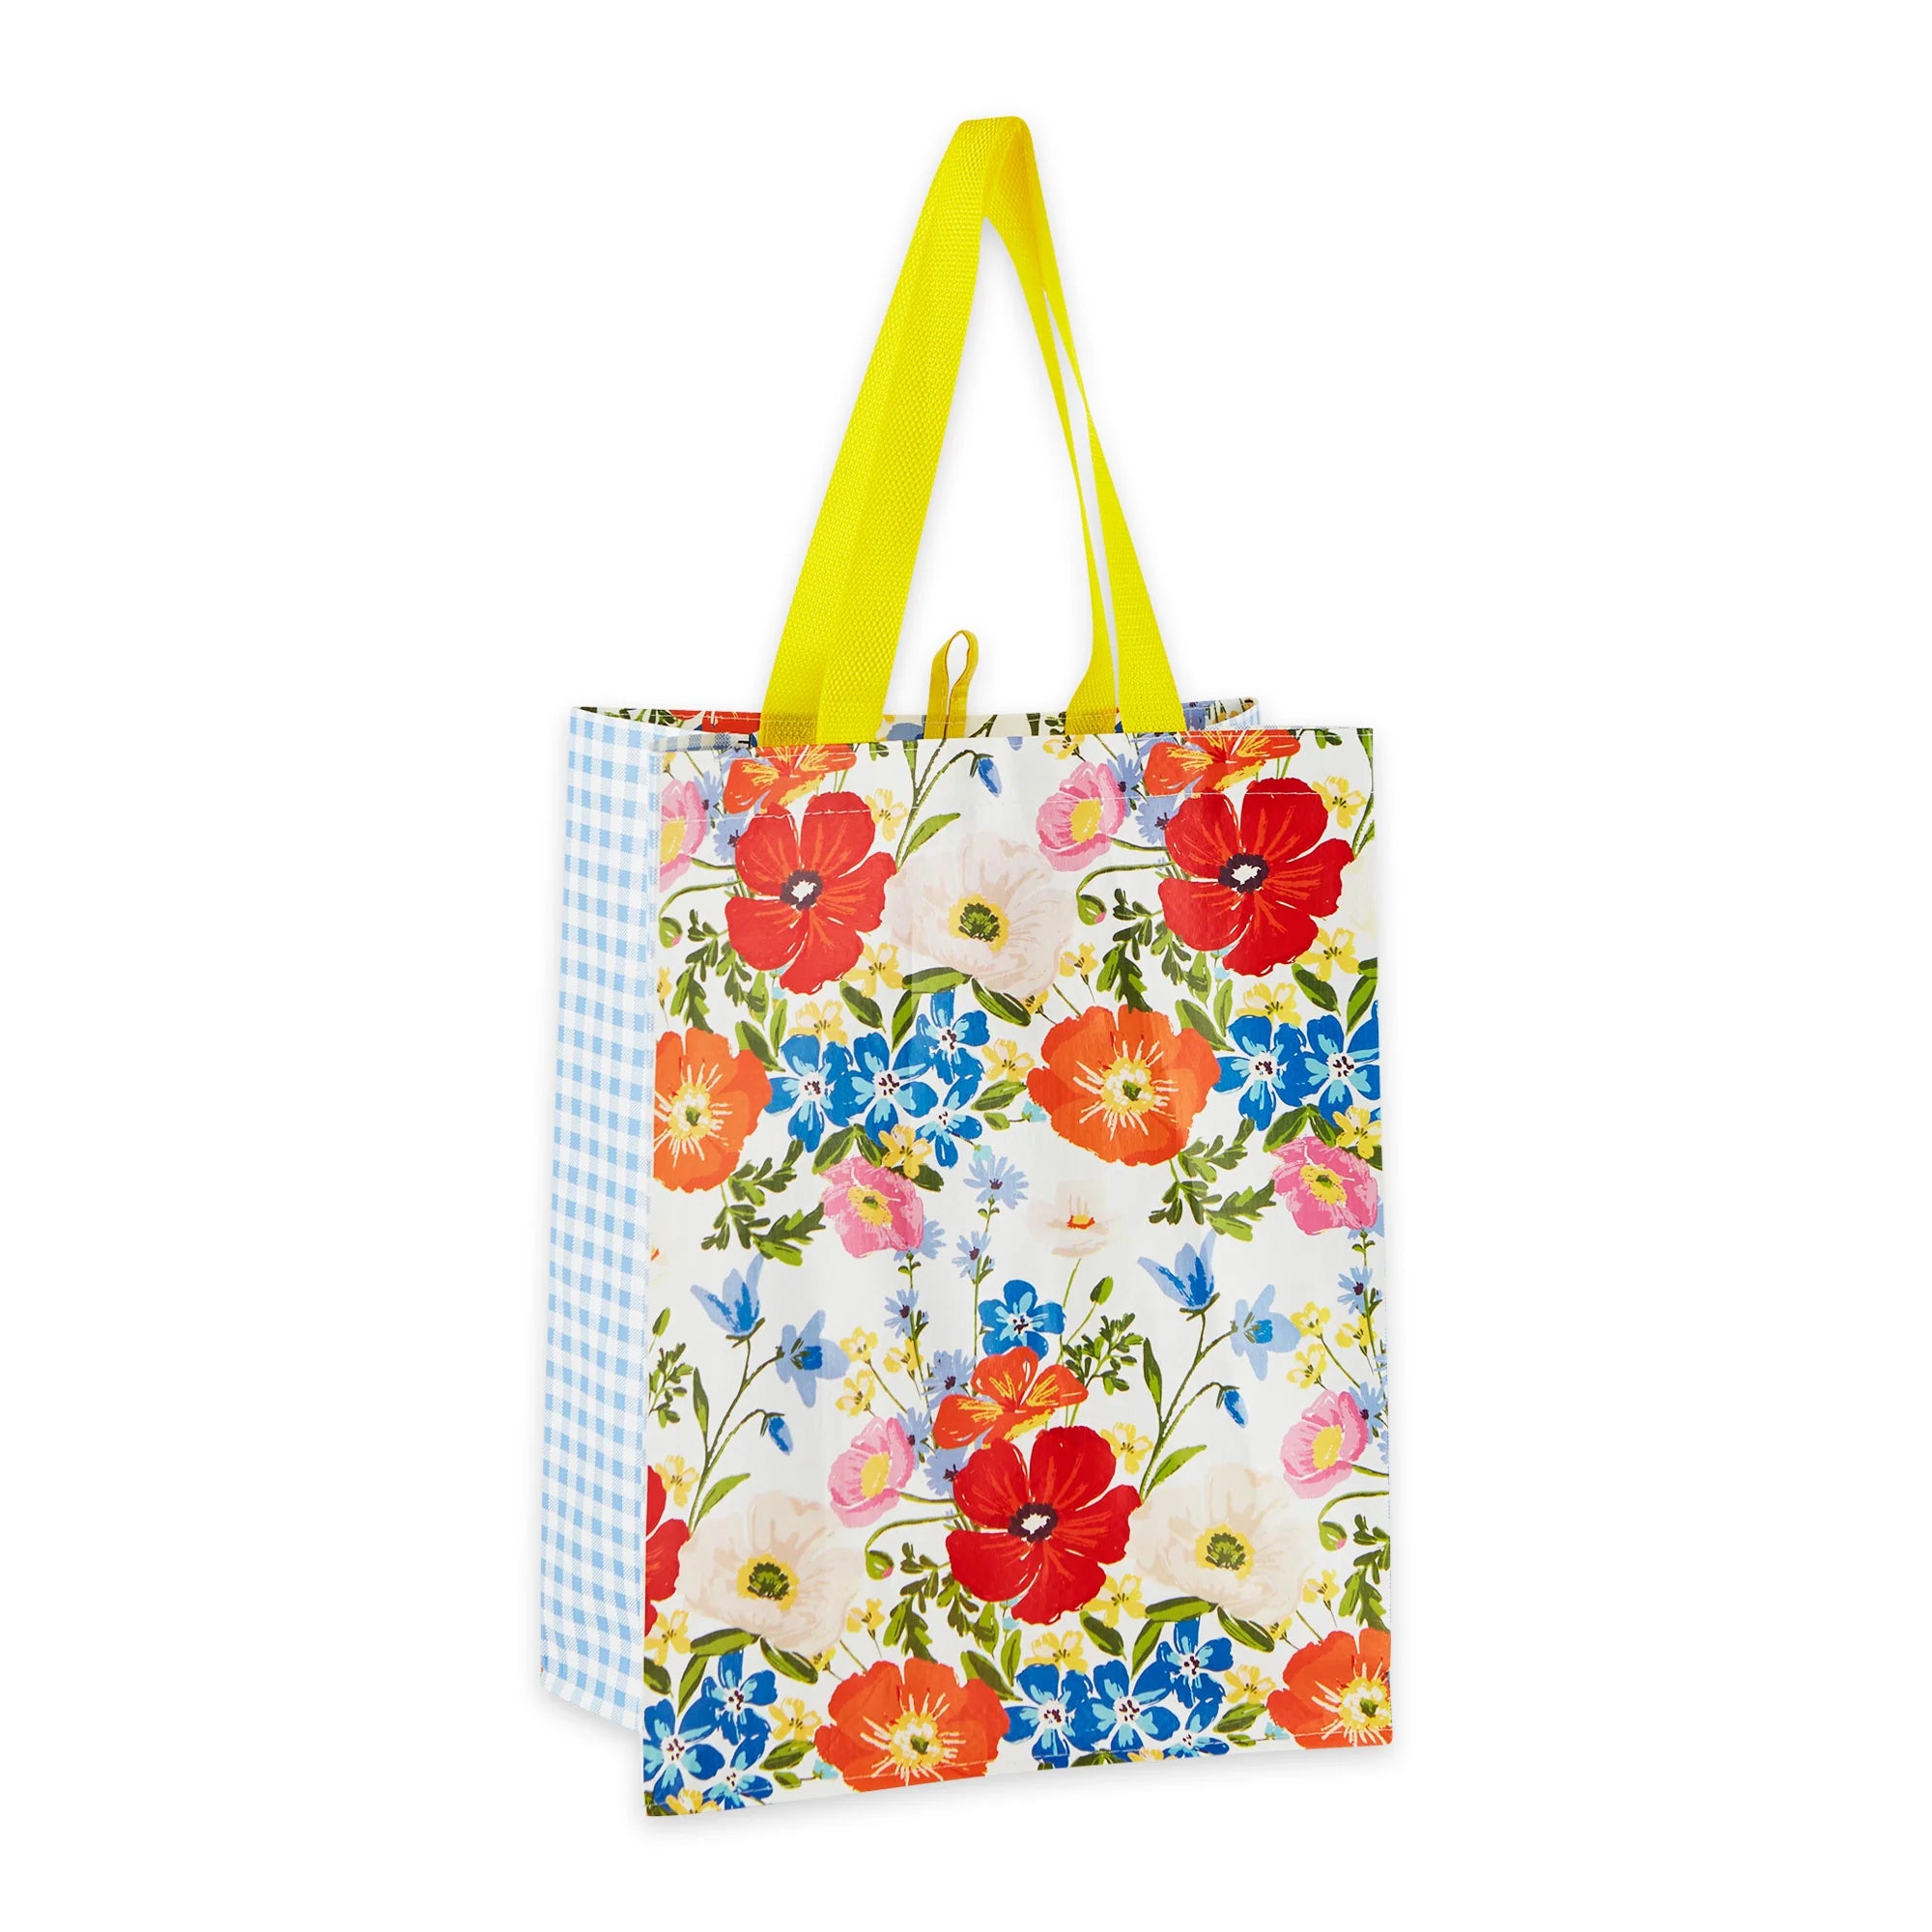 Sumer Meadow Reusable Tote | Design Imports